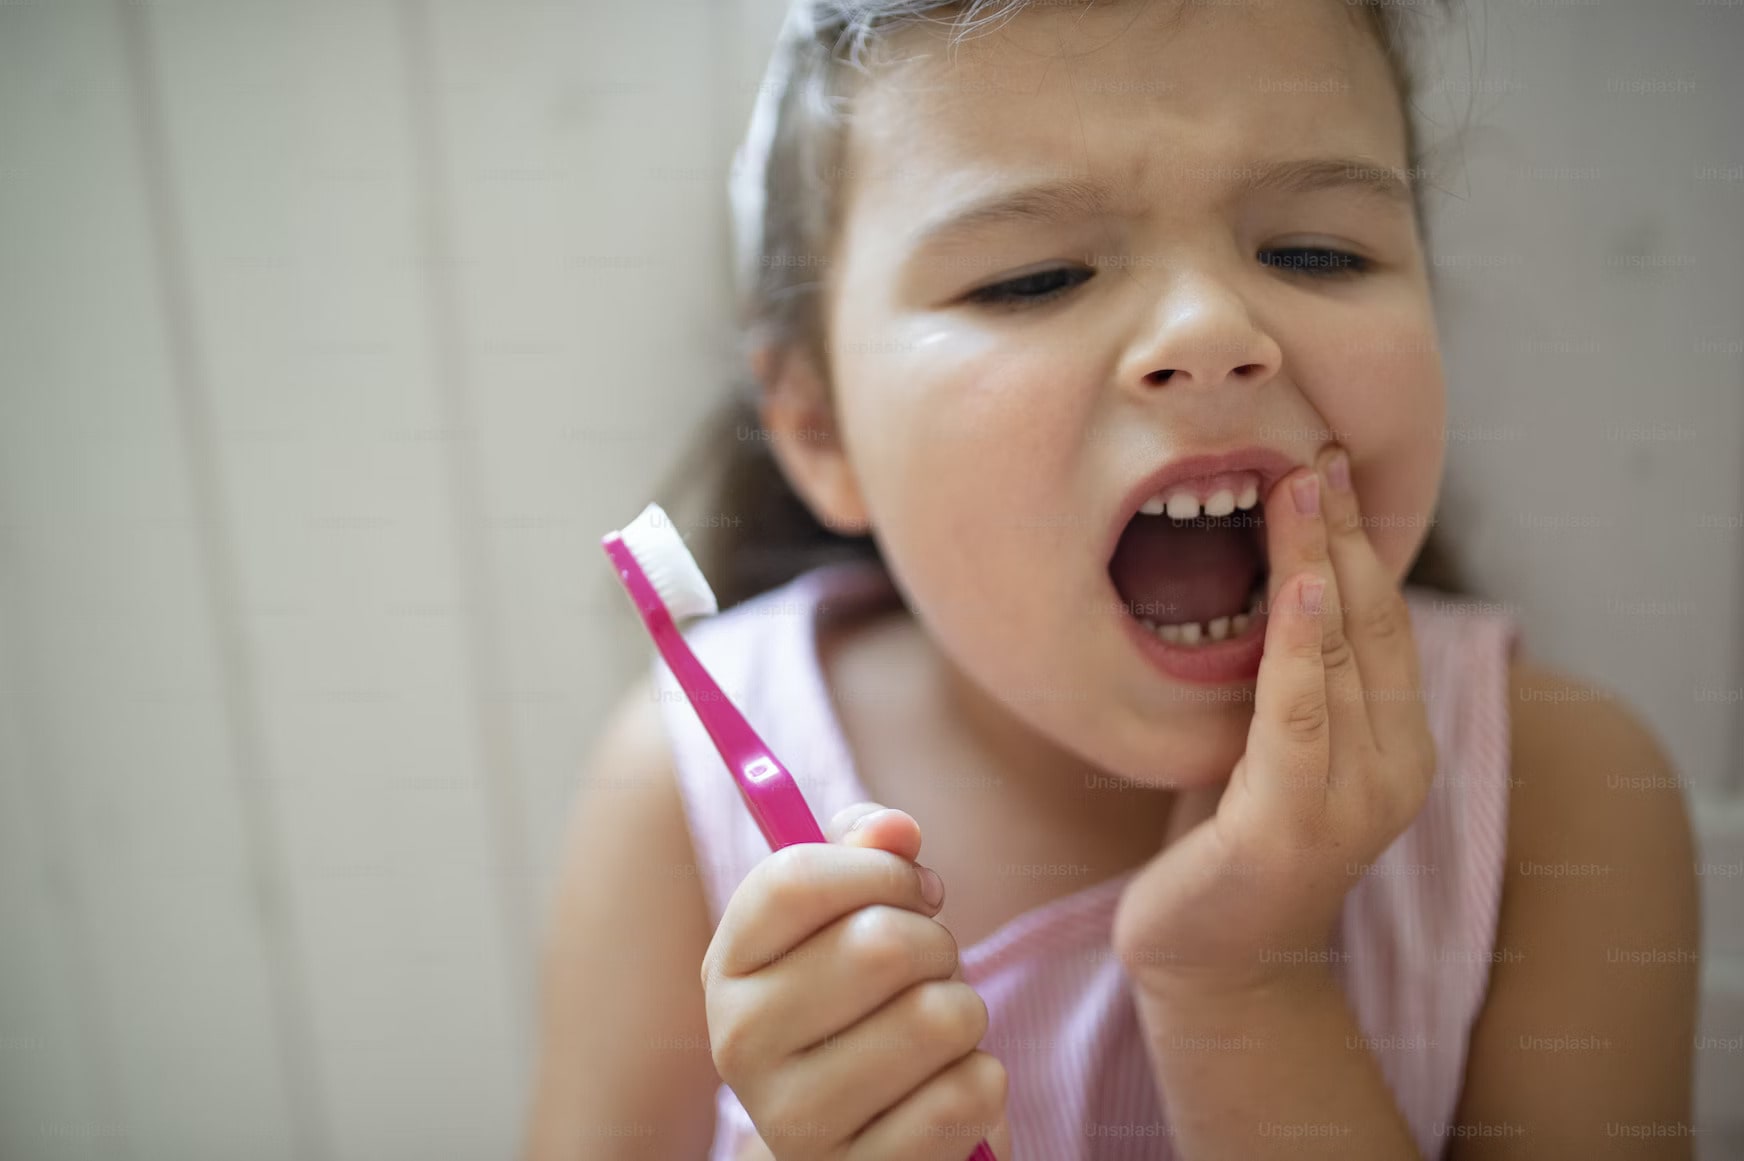 How to brush a for little person teeth?